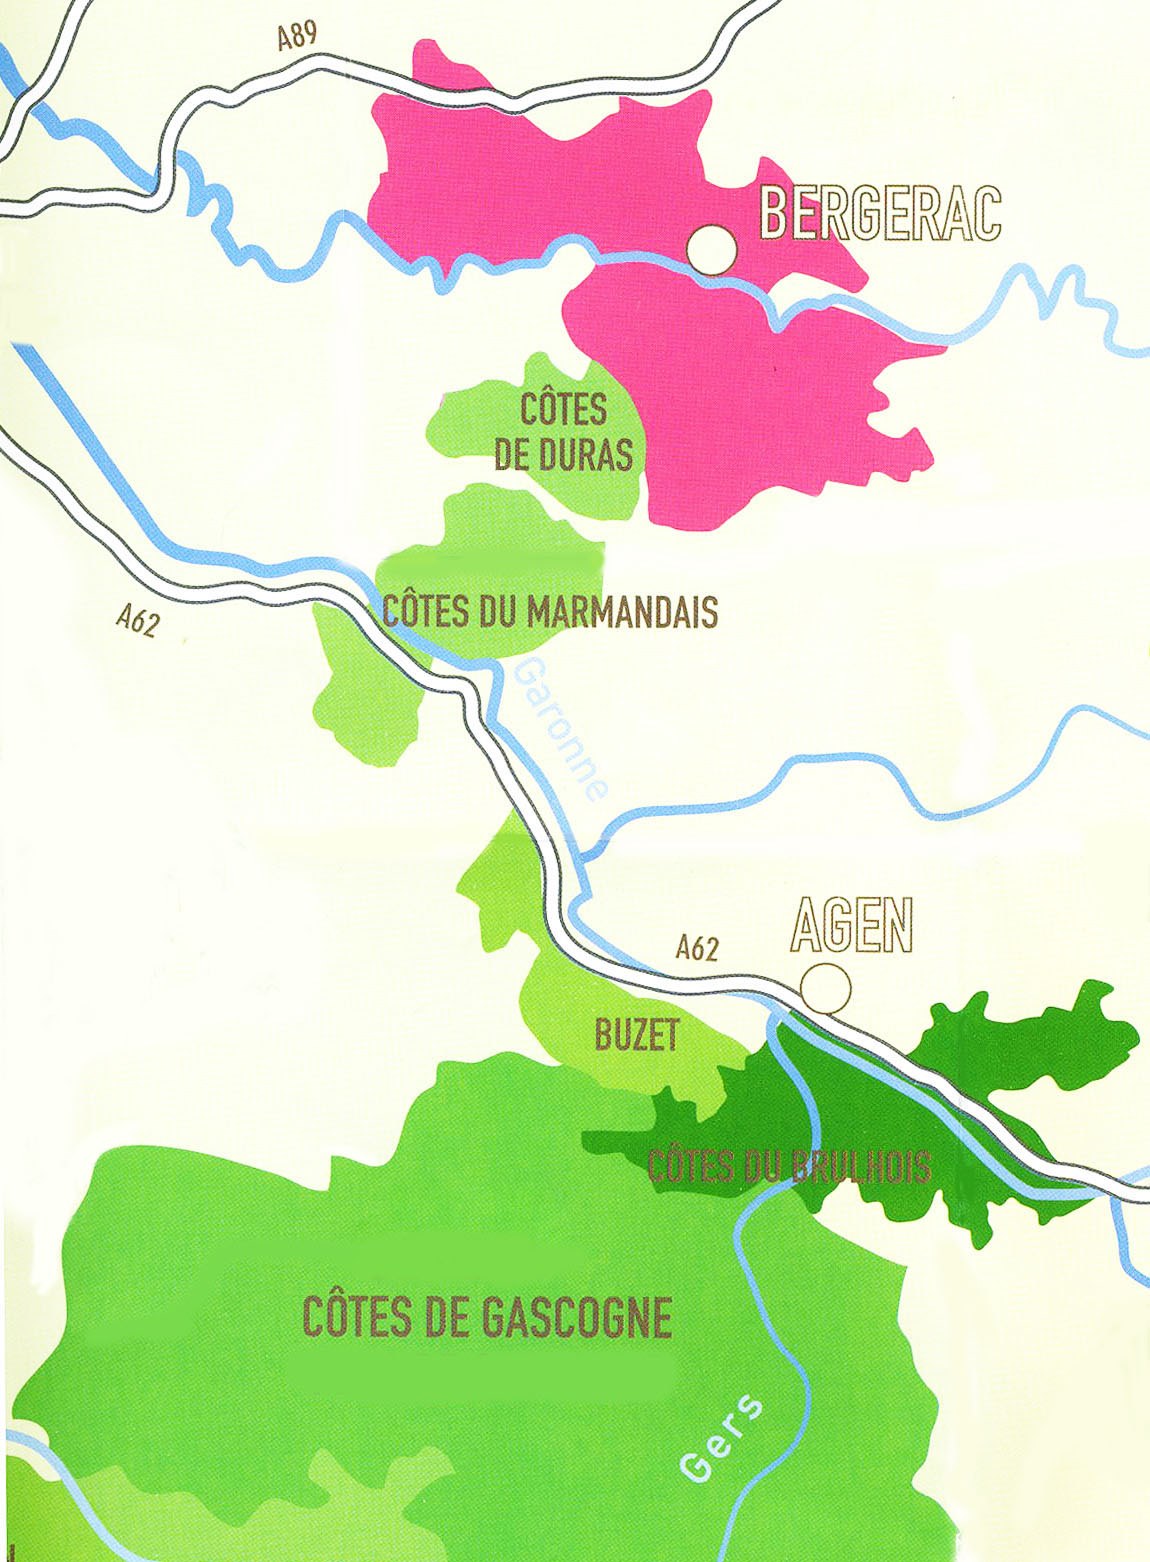 Beyond Bordeaux Satellites: From Bergerac to Gascony - Charles Neal -  Feature Articles - GuildSomm International